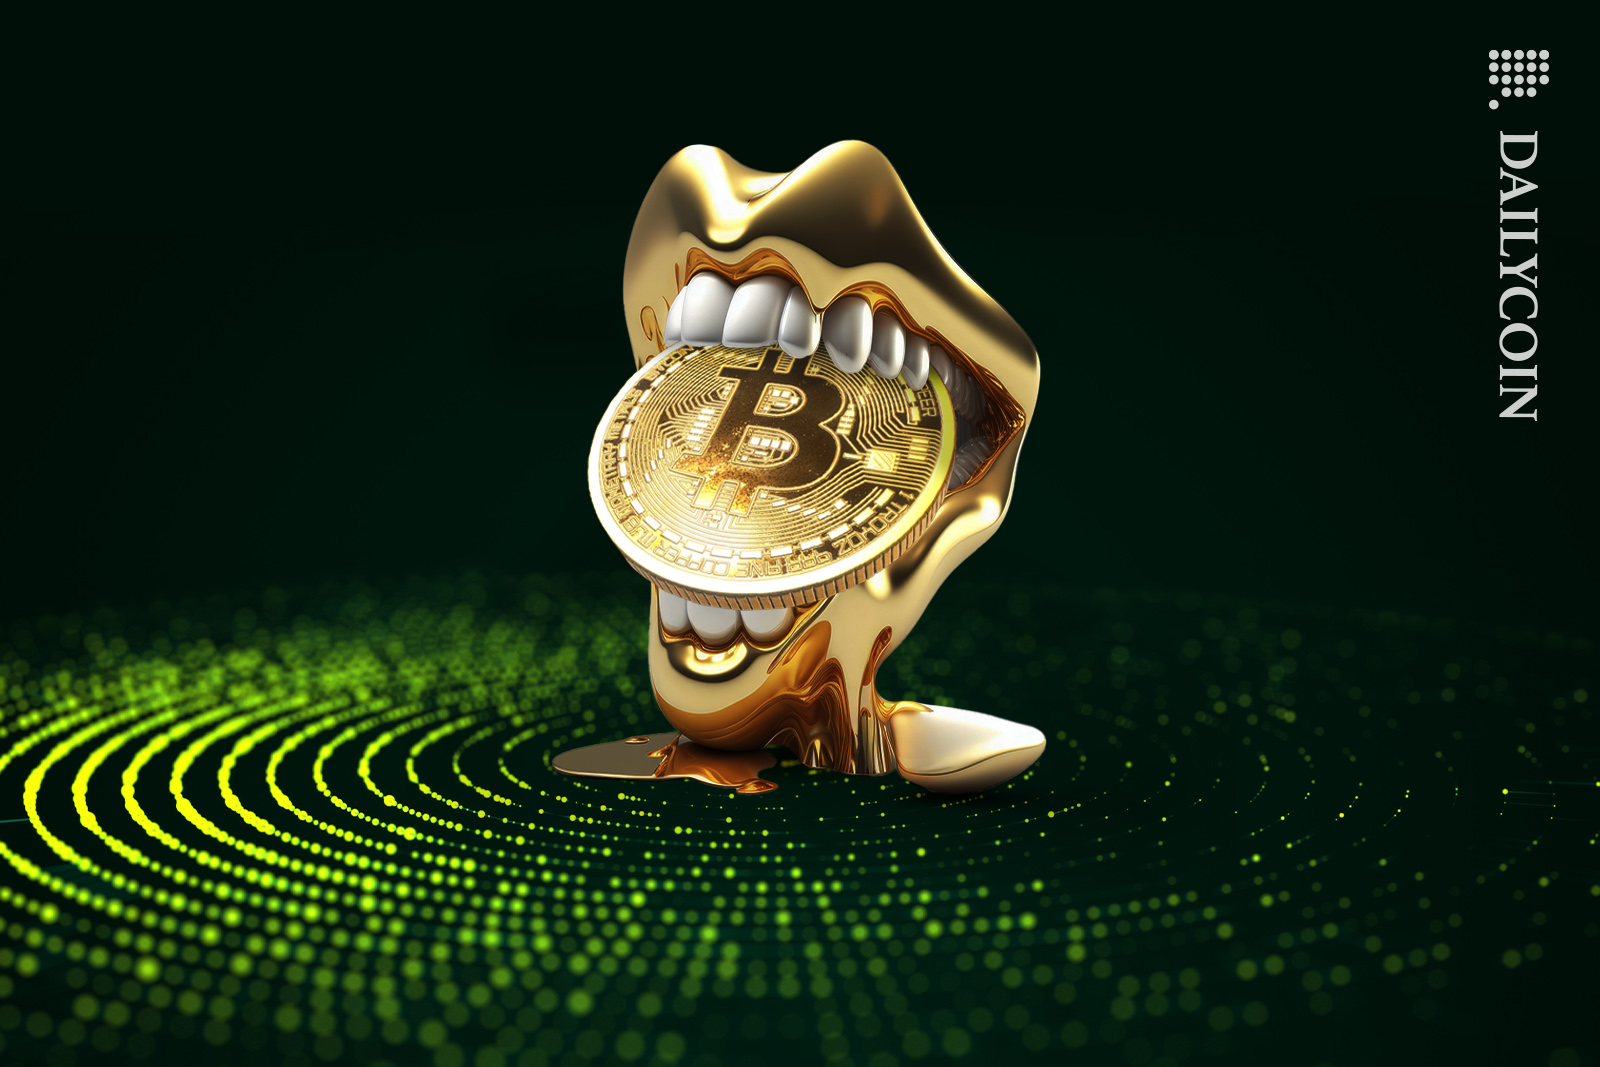 Gold mout taking a bite out of a Bitcoin in a green landscape.